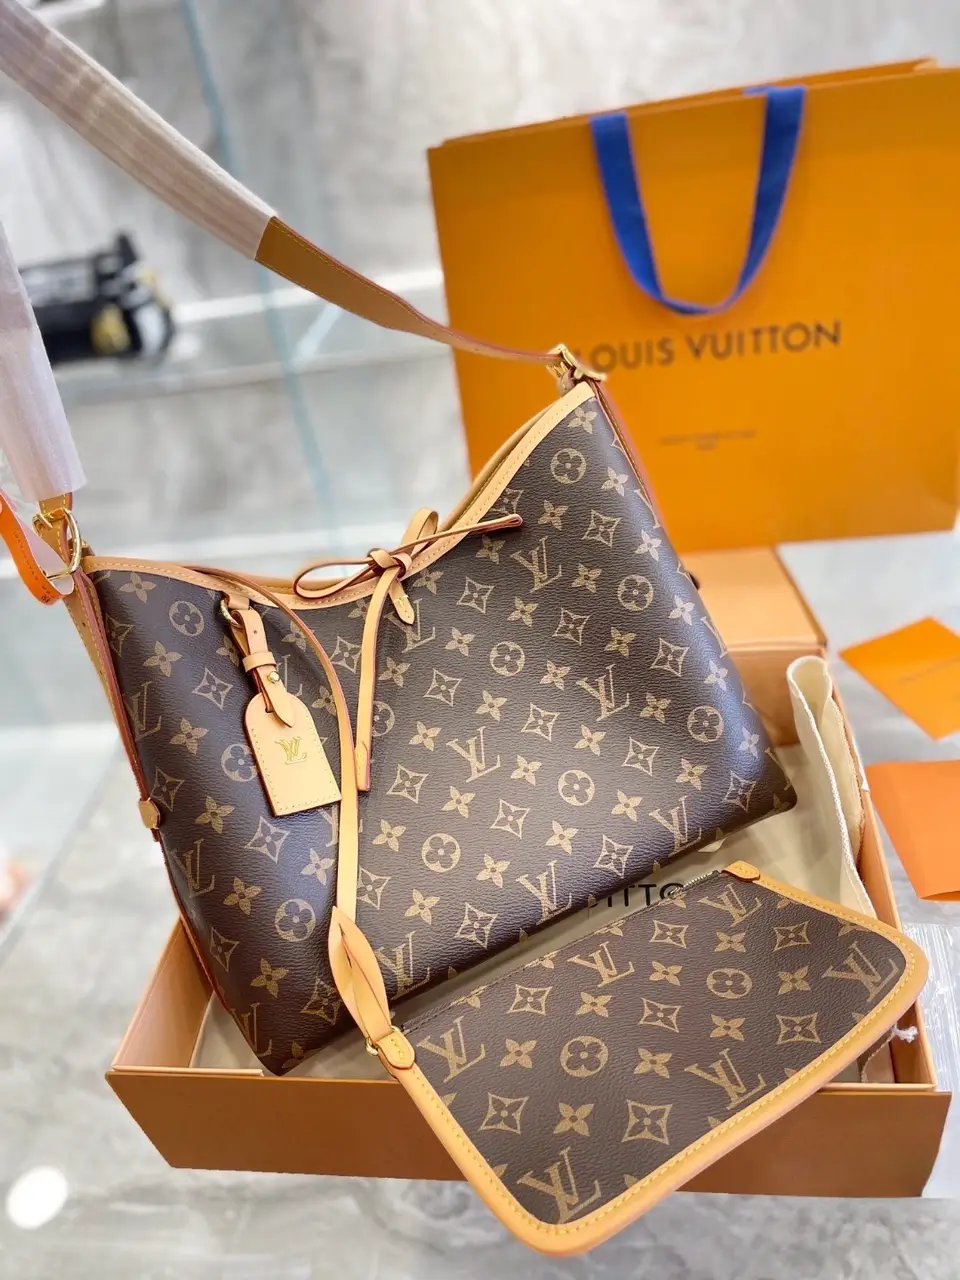 Louis Vuitton Carryall PM, Gallery posted by Marina